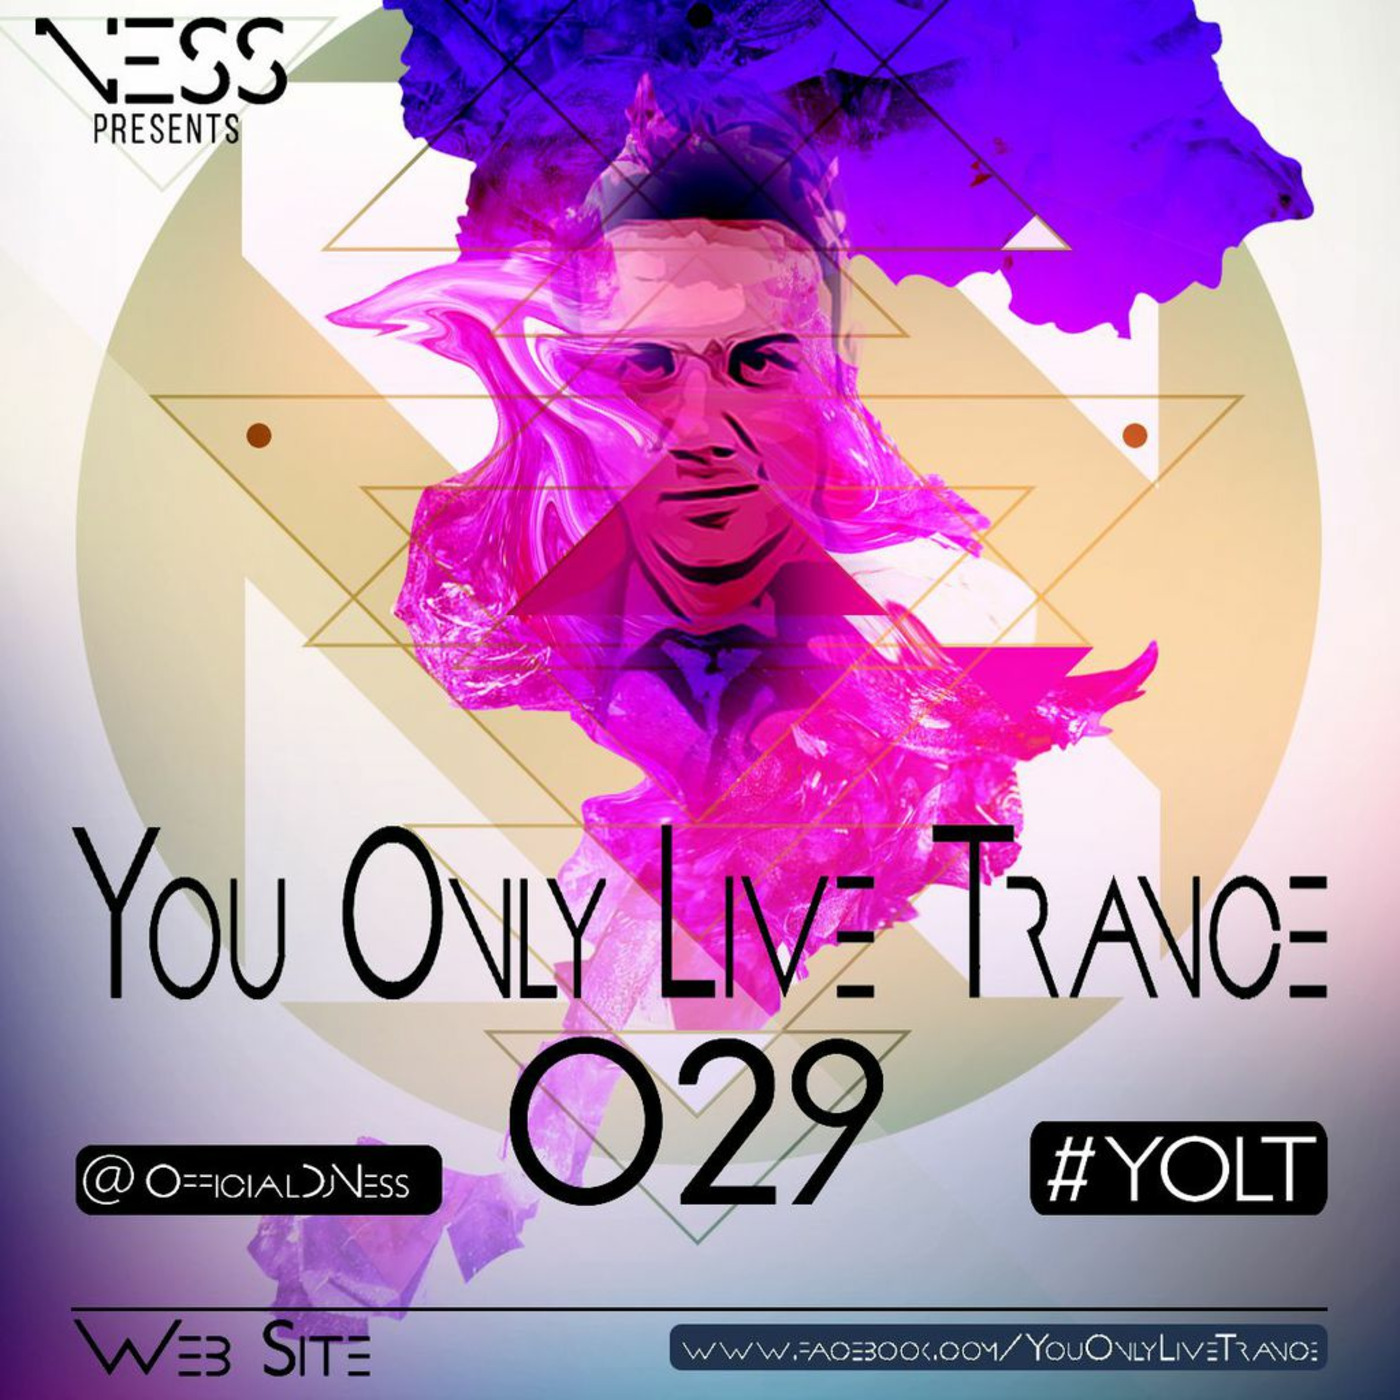 You Only Live Trance 029